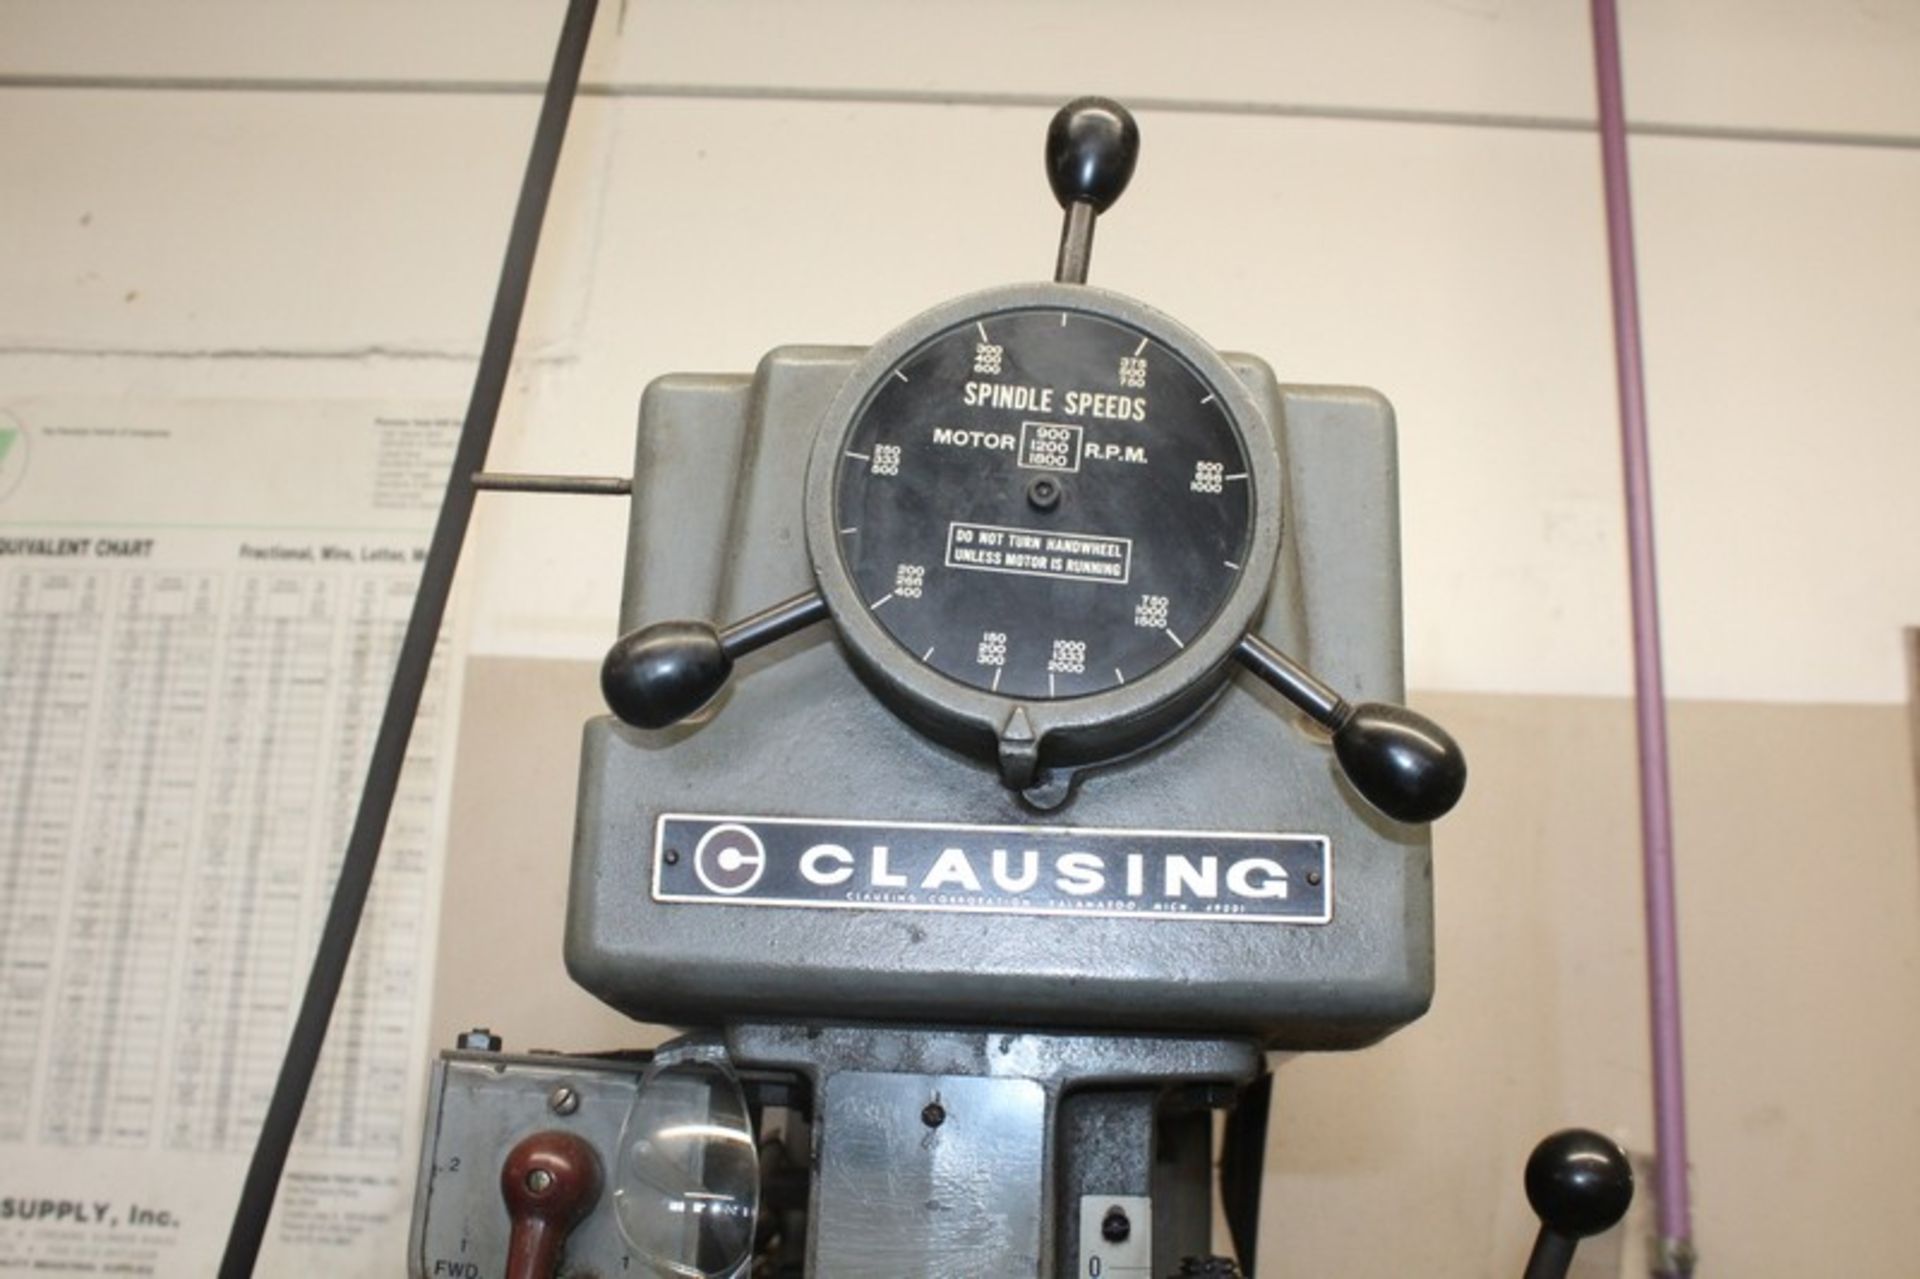 CLAUSING 20” MODEL 2276 VARIABLE SPEED FLOOR STANDING DRILL PRESS, S/N 516519, SPINDLE SPEEDS 150- - Image 2 of 5